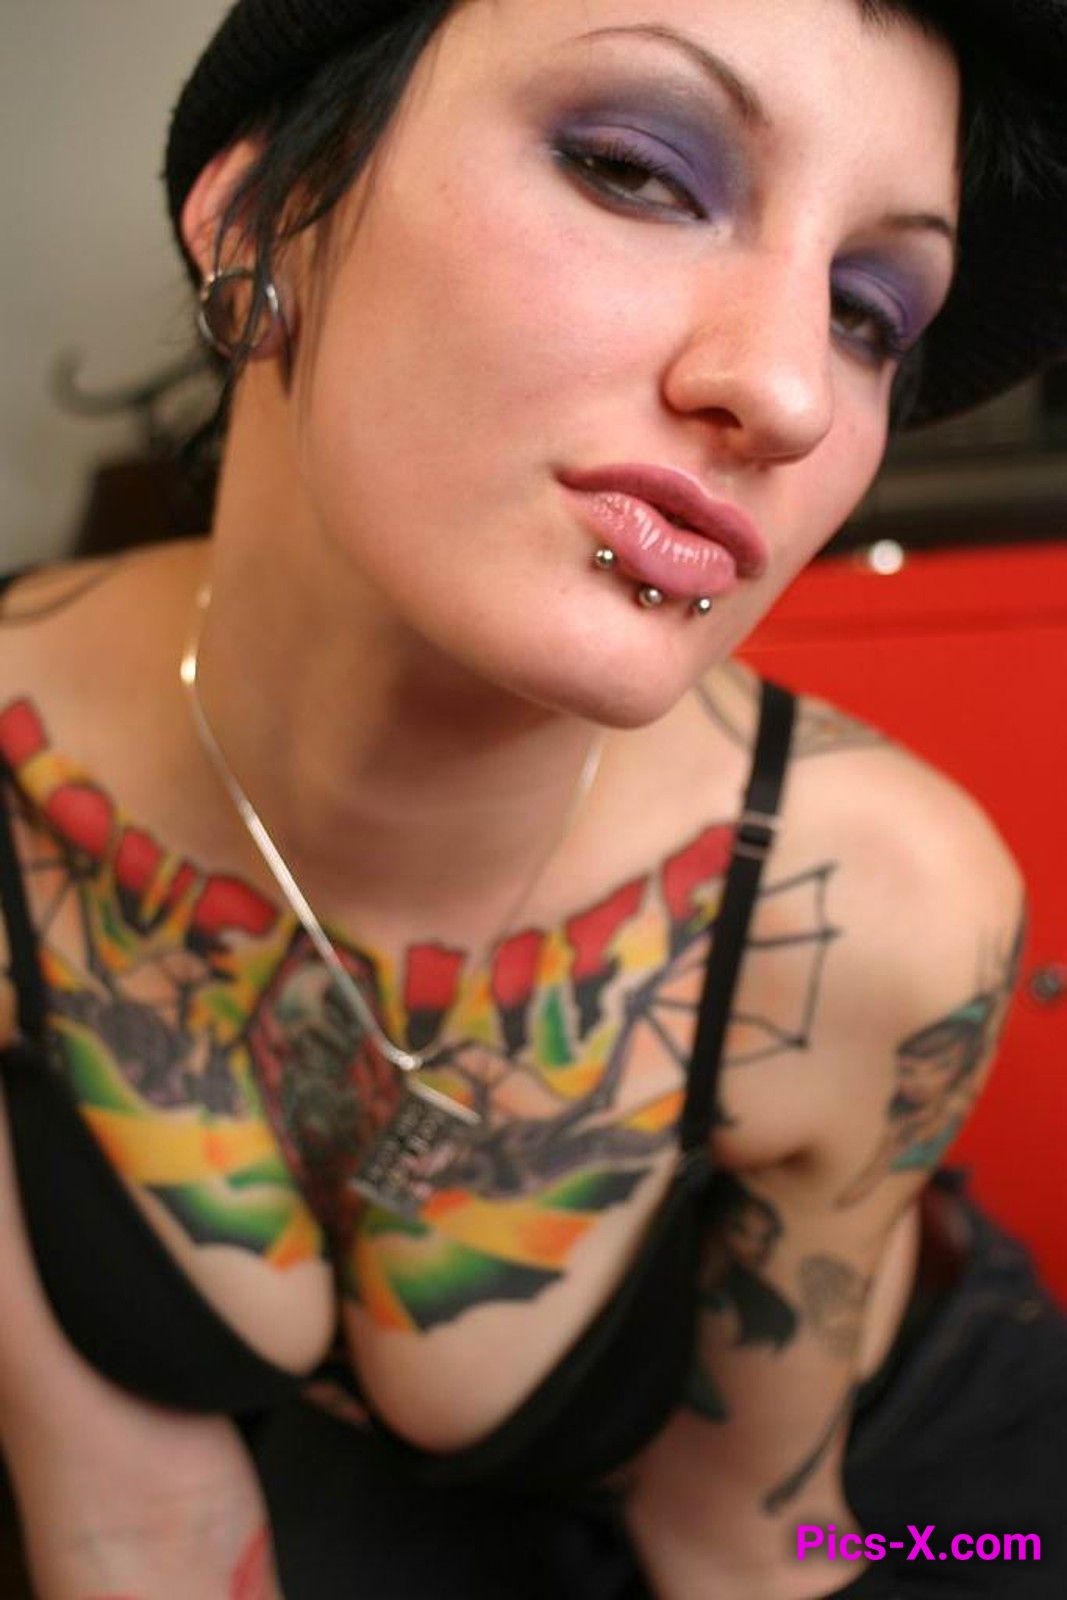 Inked up punk girl getting naked with some vinyl - Punk Rock Girlfriend - Image 10